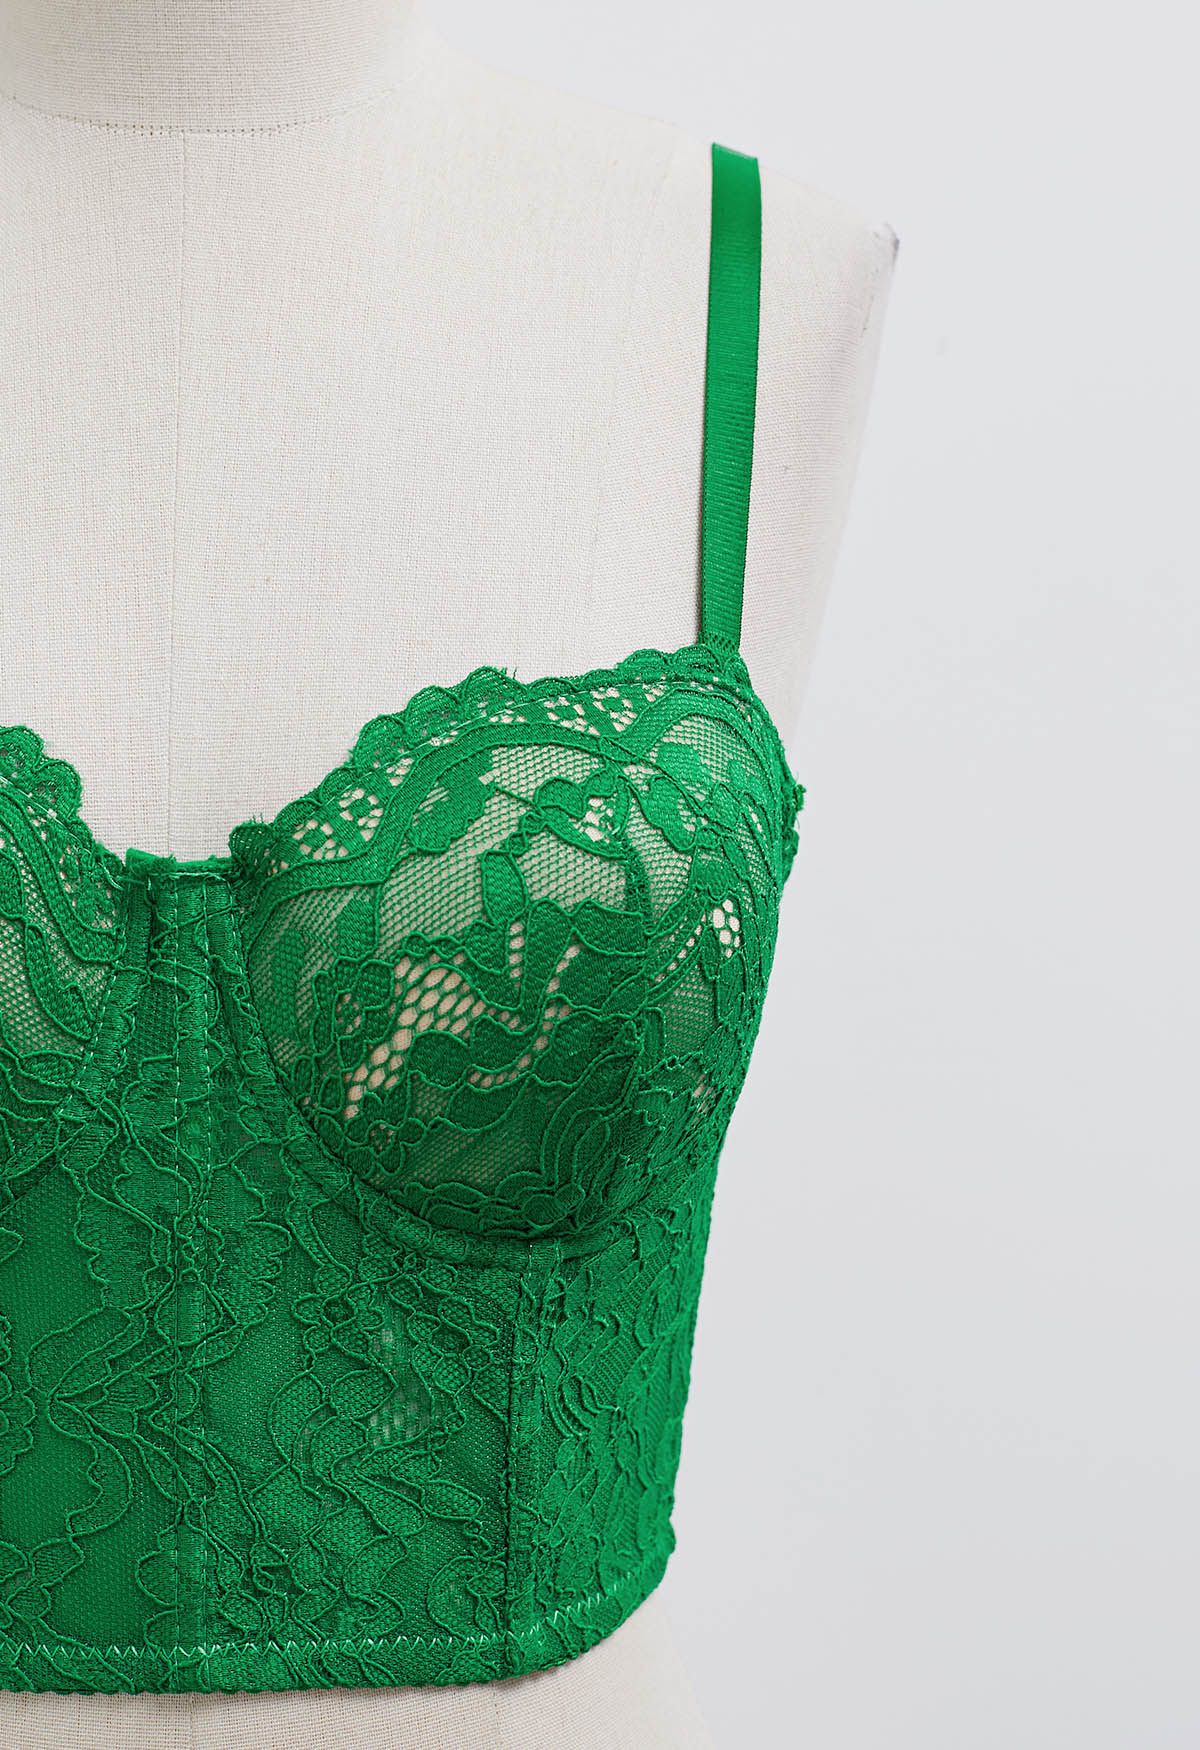 Floral Lace Bustier Crop Top in Green